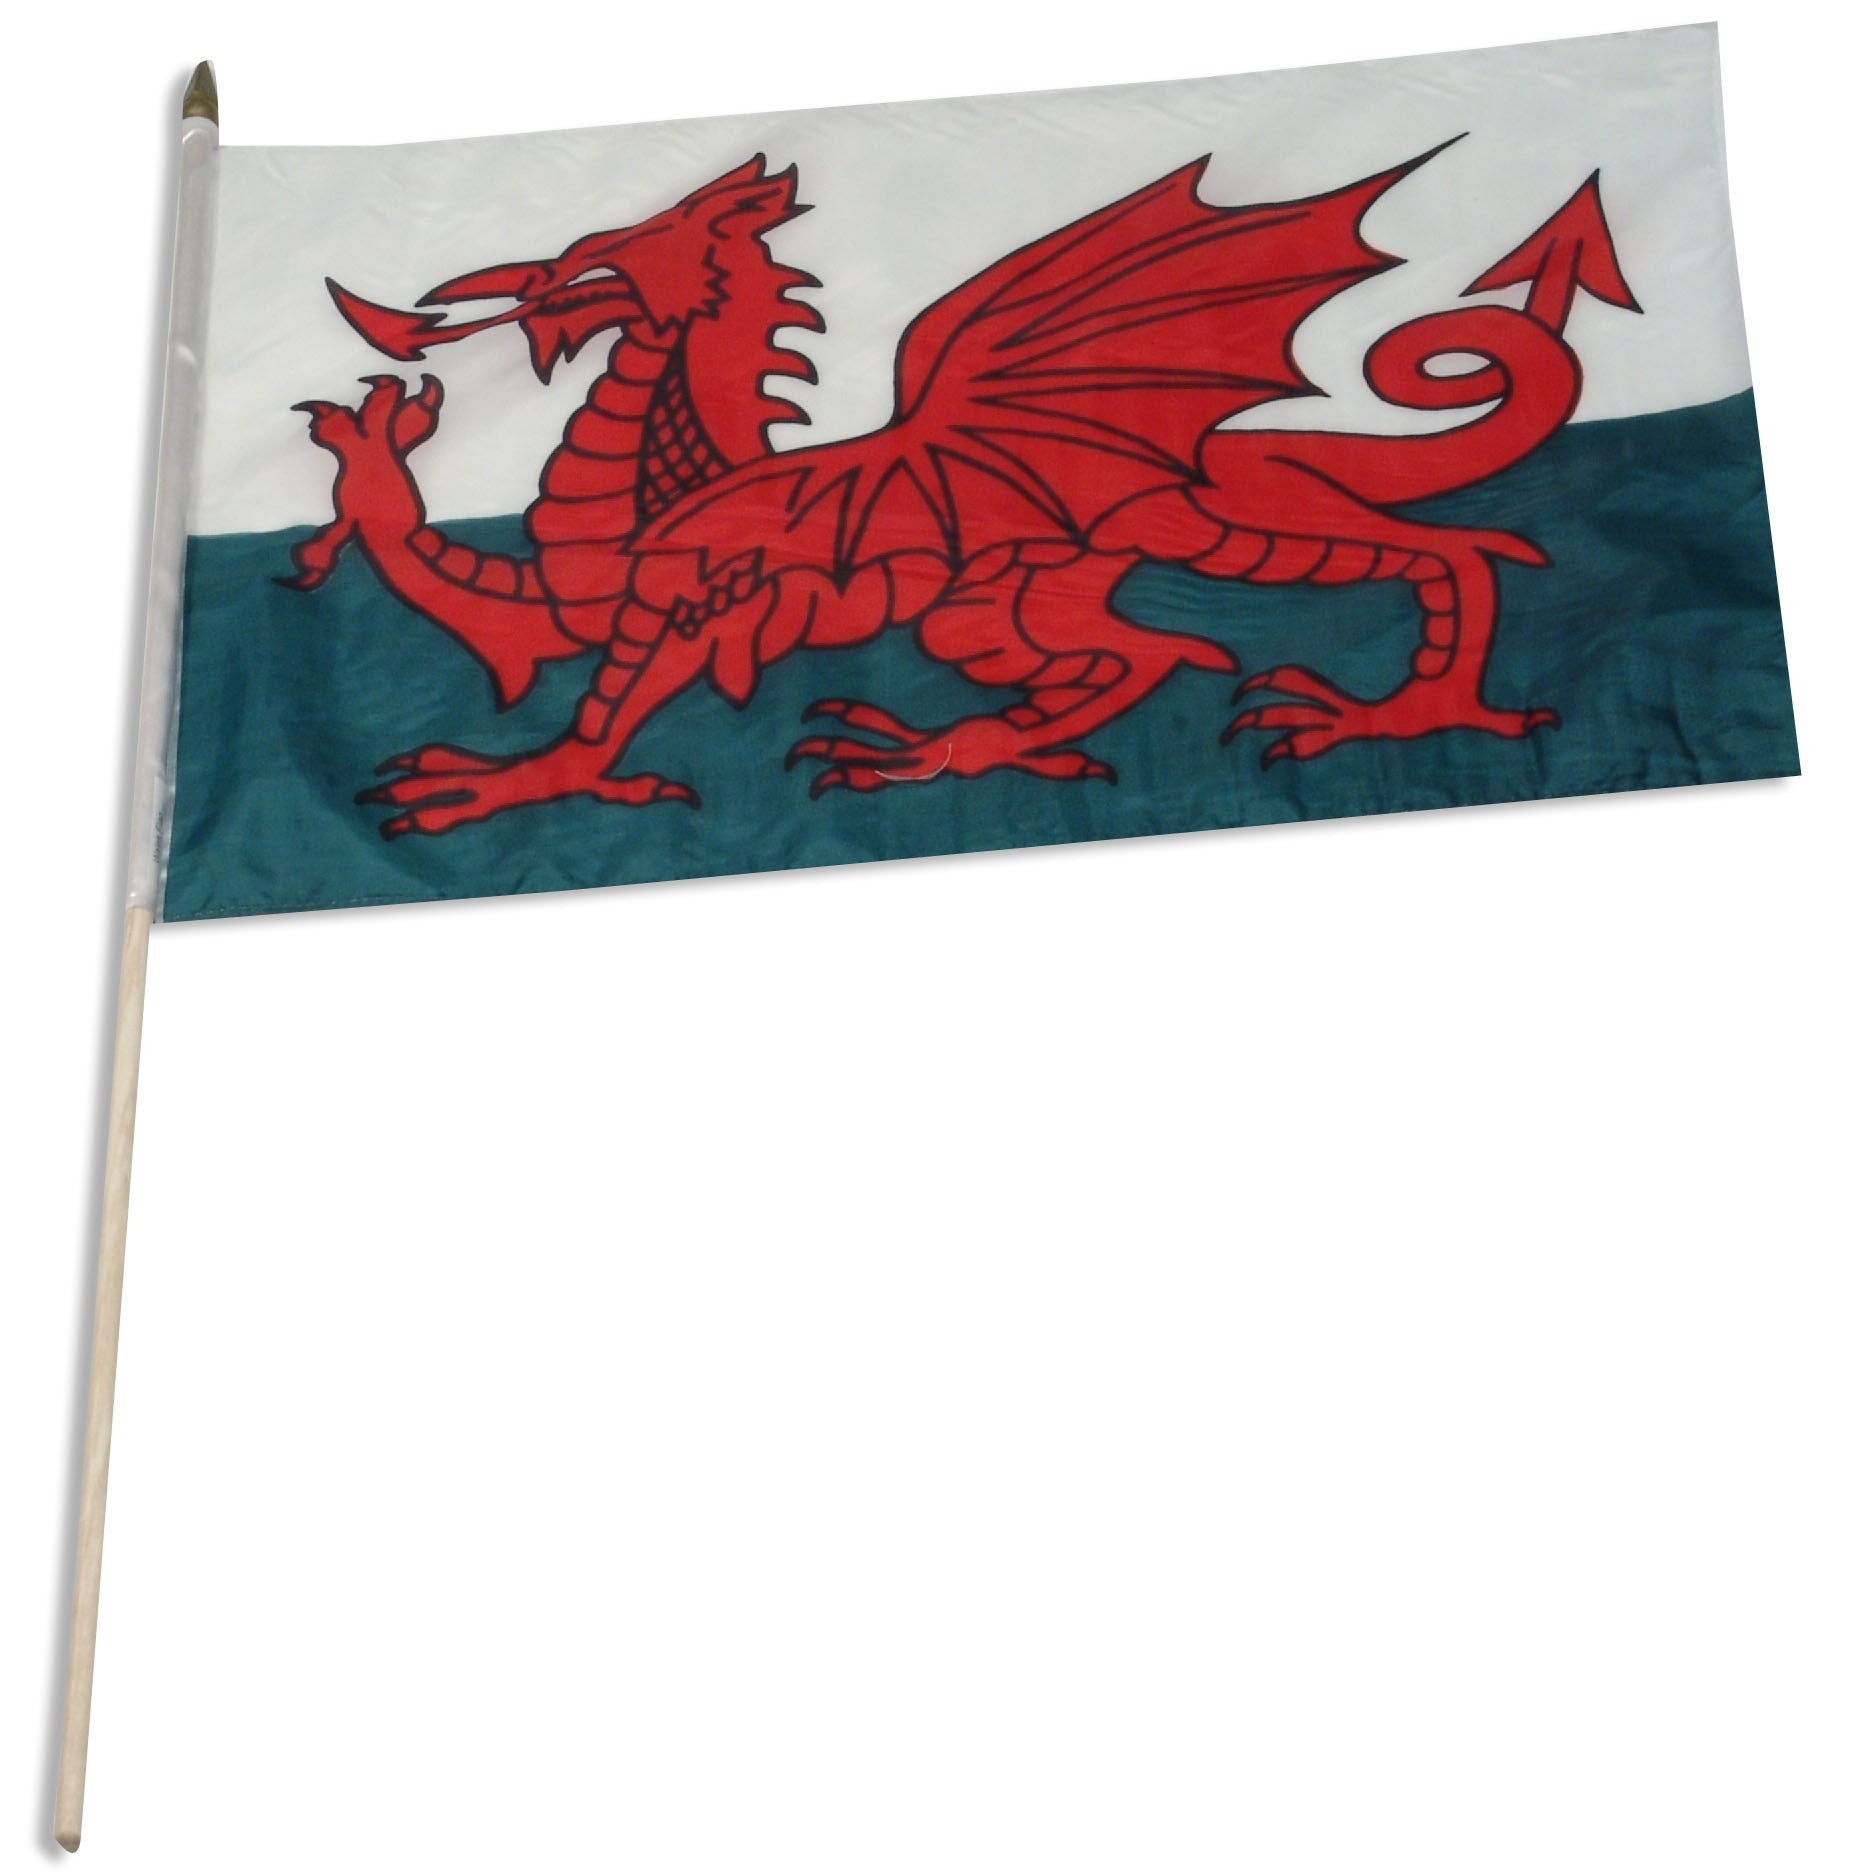 Wales 12" x 18" Mounted Stick Flag